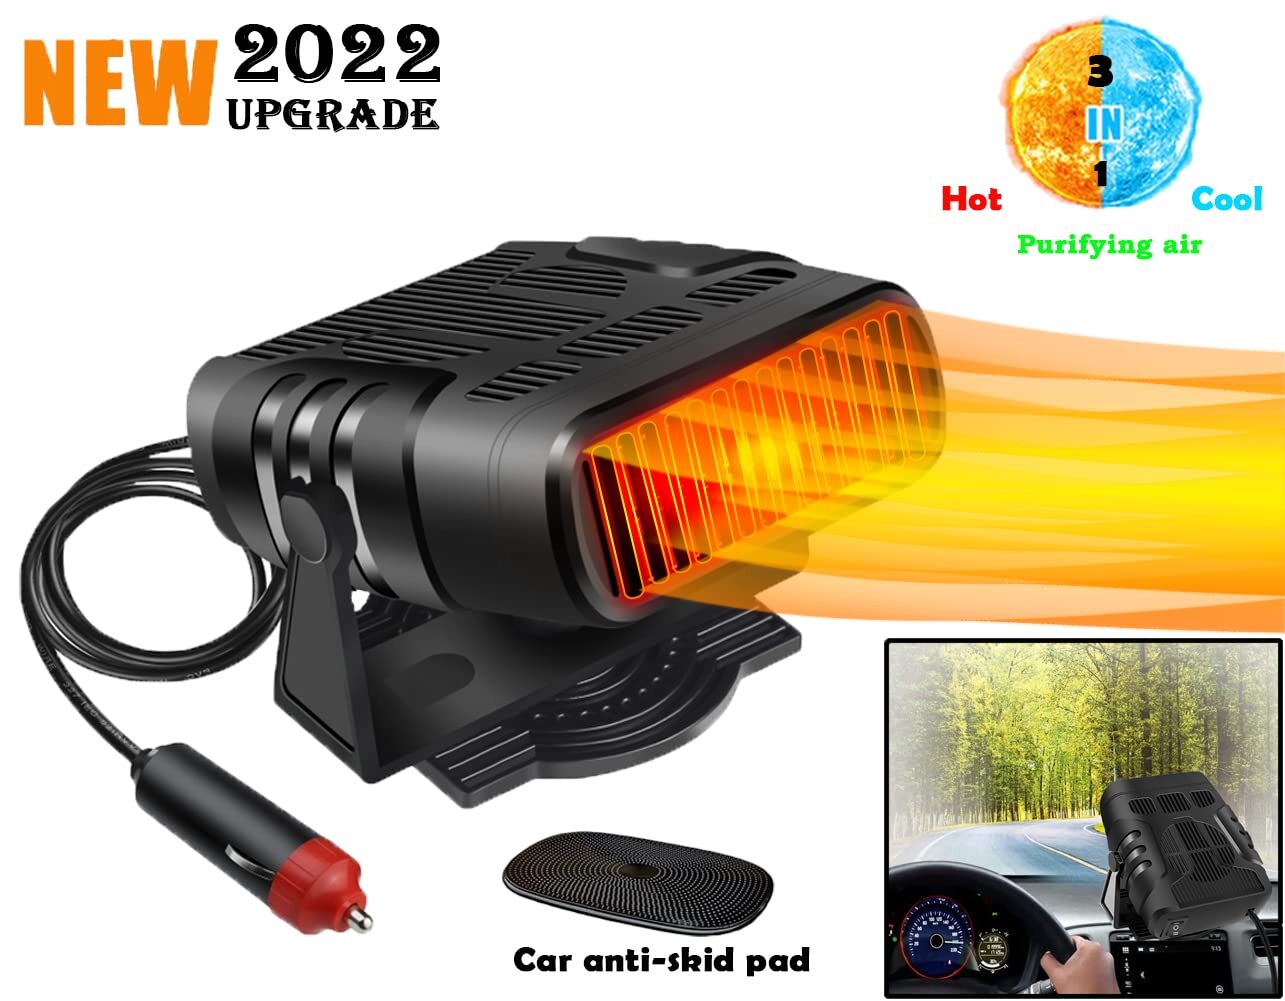 2022 New Upgrade car Heater,12V Portable Fan Defrost and Defog Car Heater for Windshield Automobile Plug Thermostat Fast Cooling Heating 